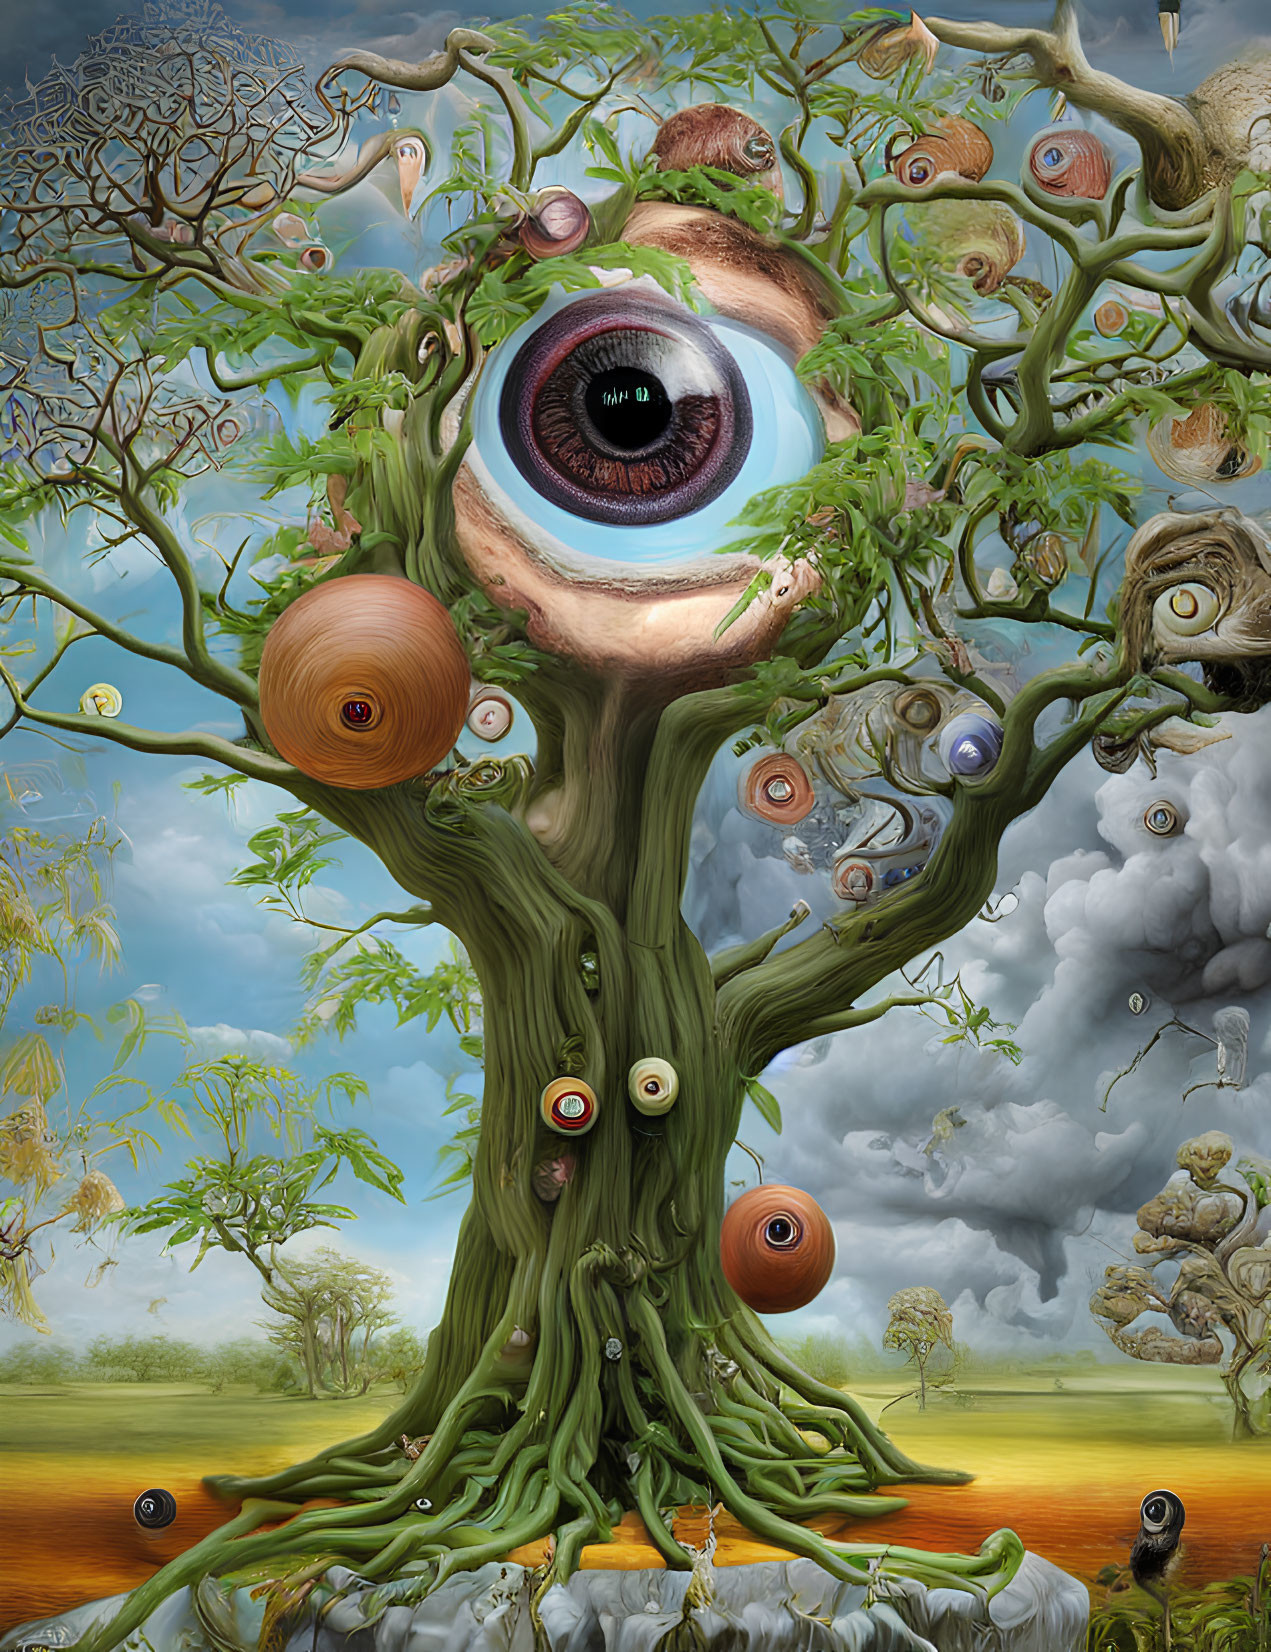 Surreal painting: Tree with human-like eyes in cloudy landscape